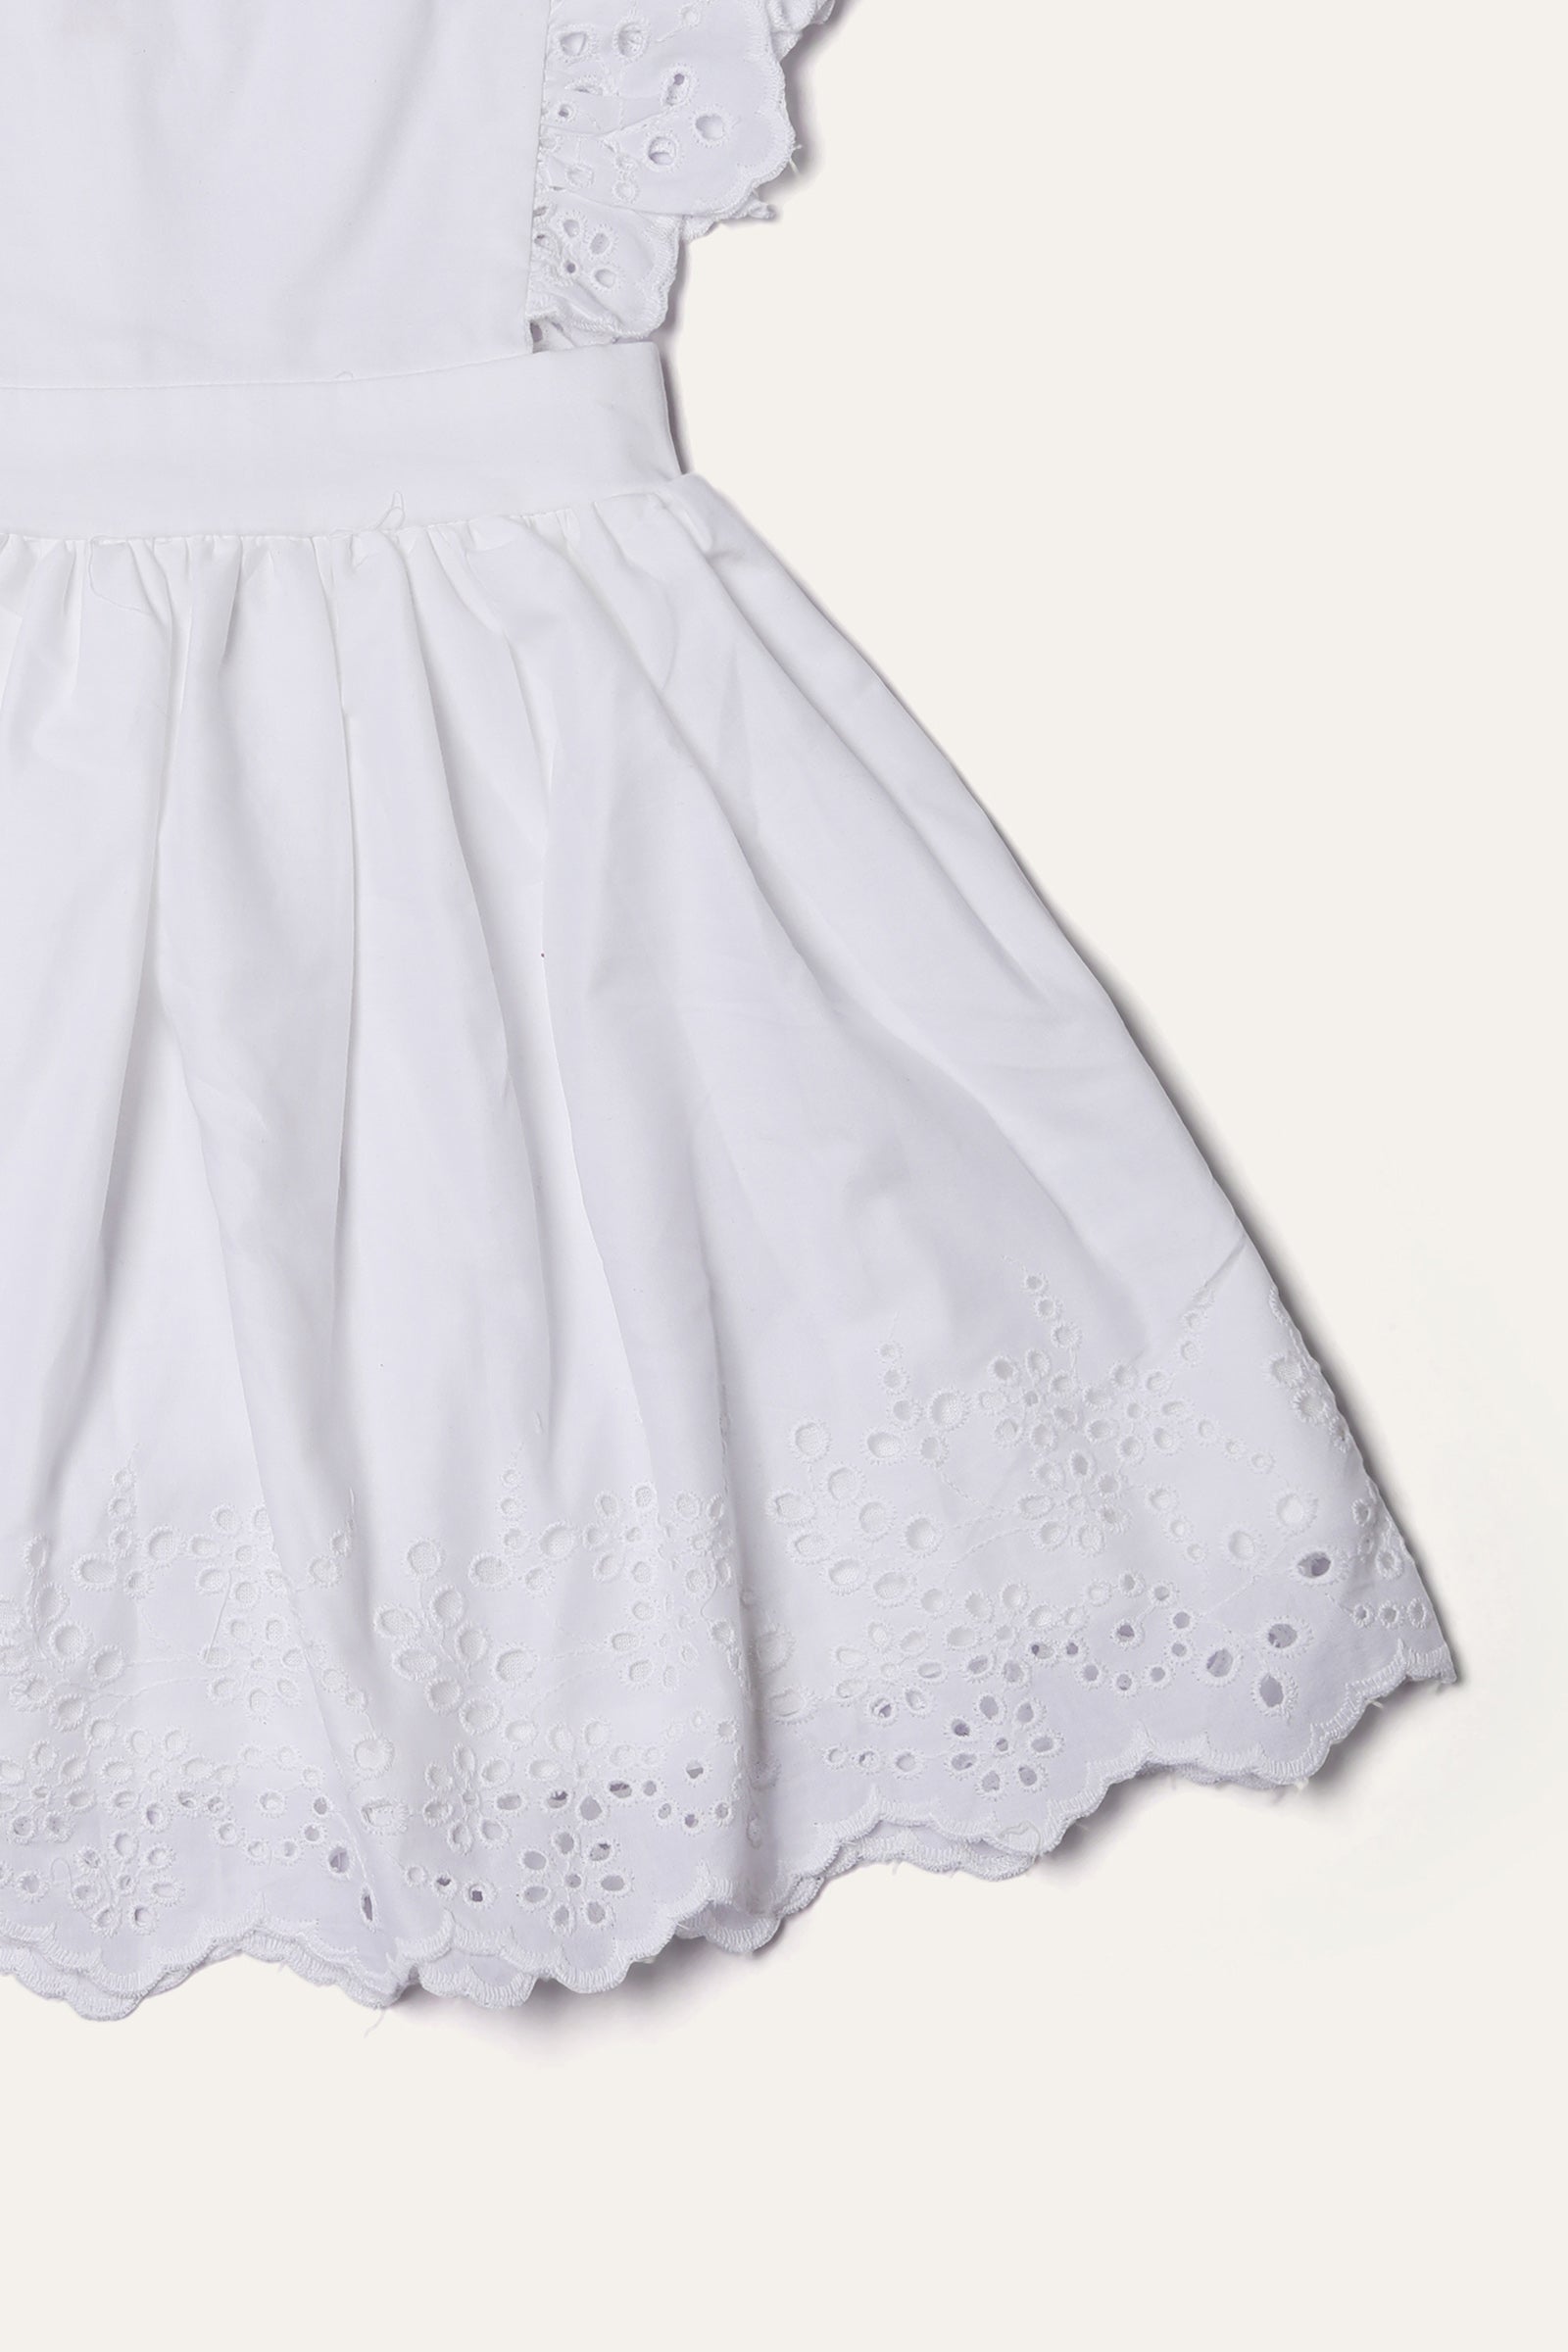 Embroidered Frock with Diaper Cover (IF-380)